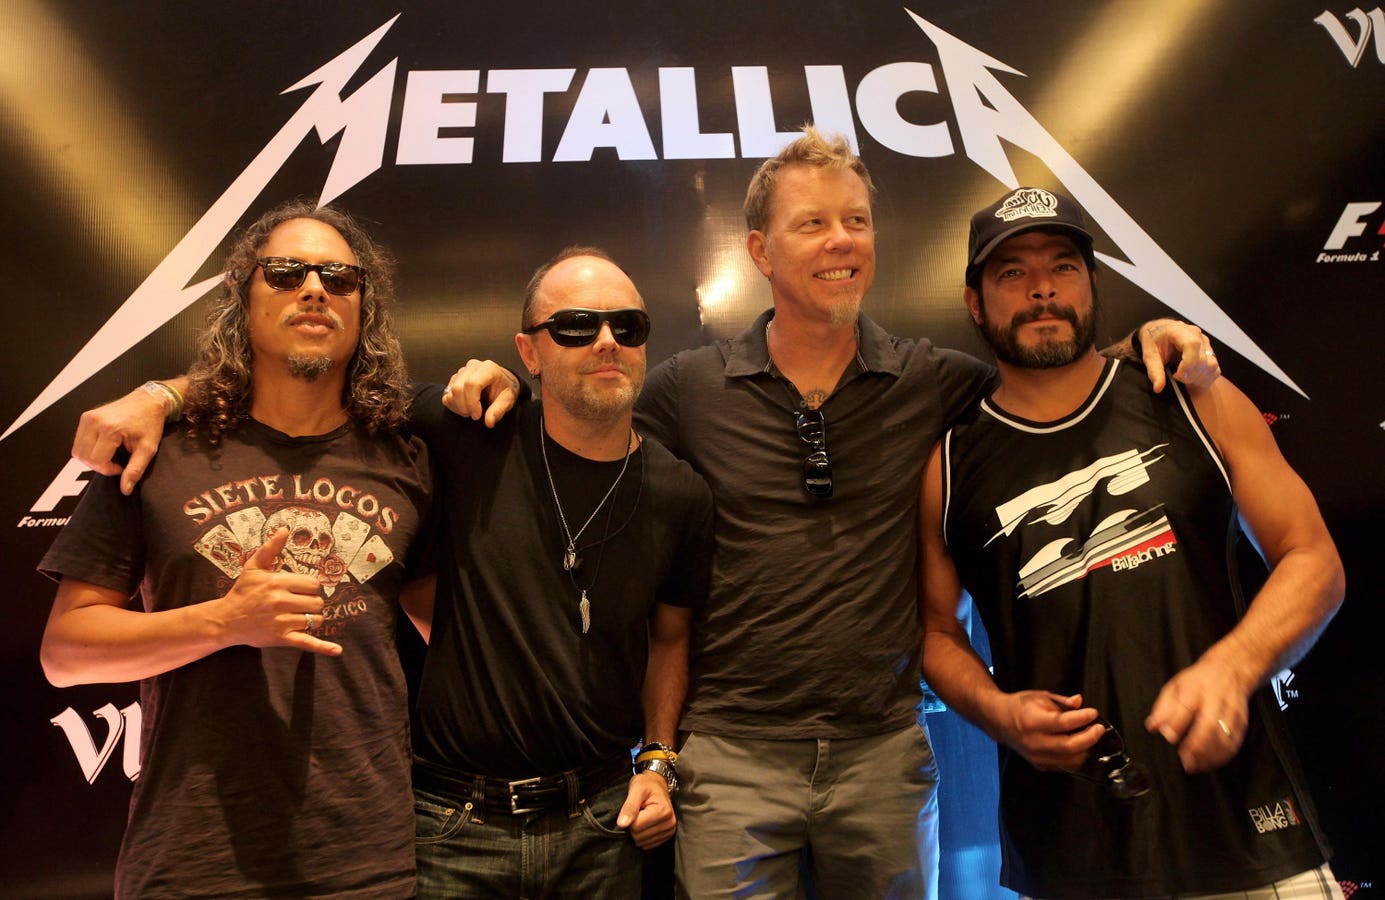 Metallica Announced As ‘Fortnite Festival’ Headliner: Here Are Other Artists That Have Performed In-Game